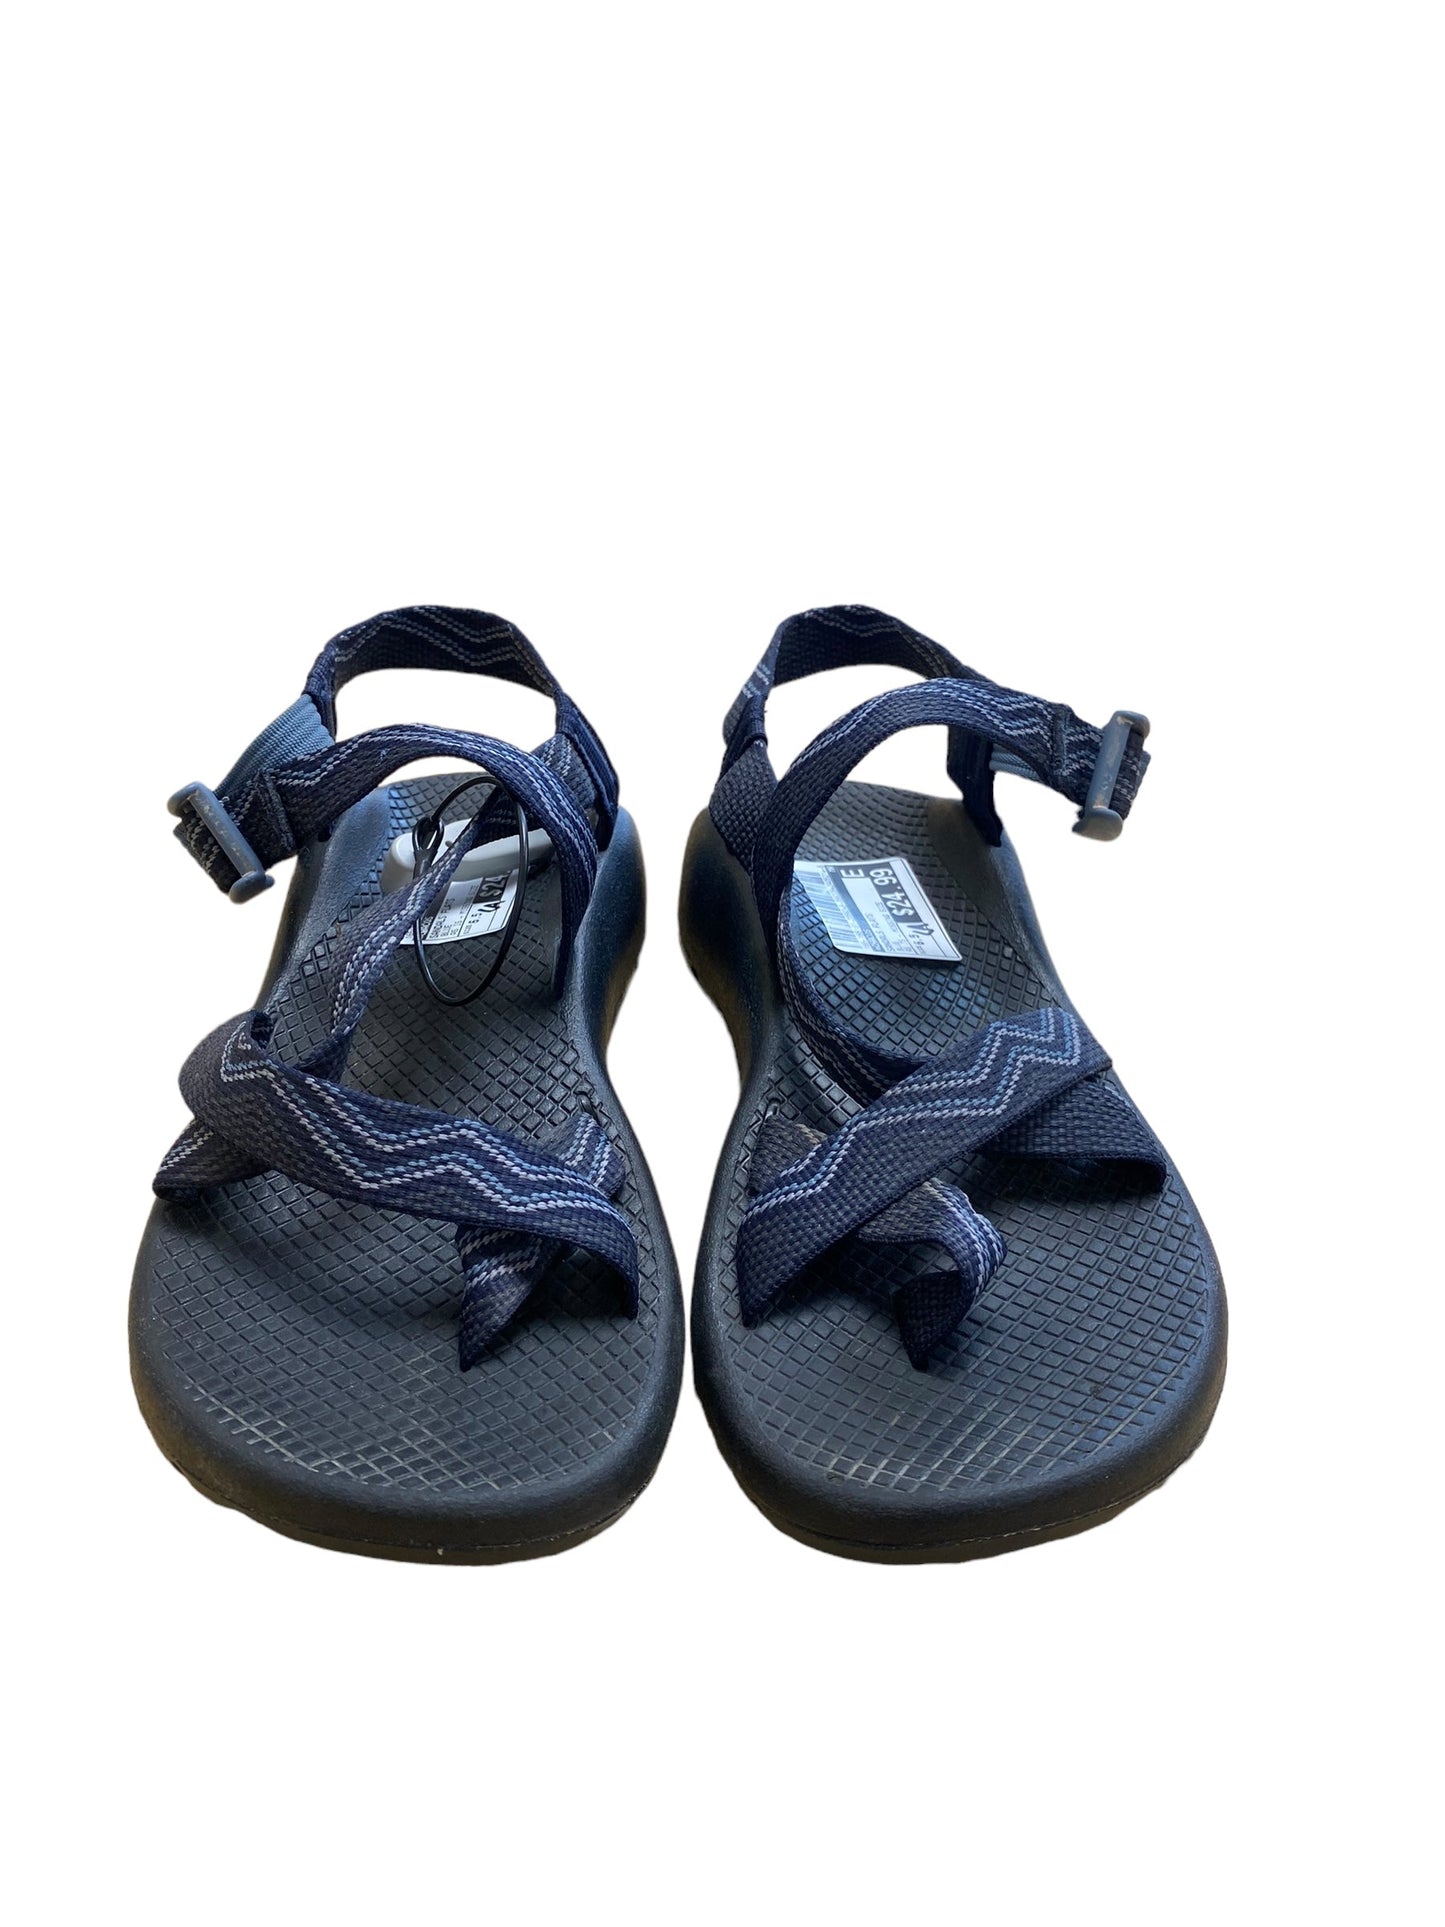 Sandals Flats By Chacos  Size: 6.5